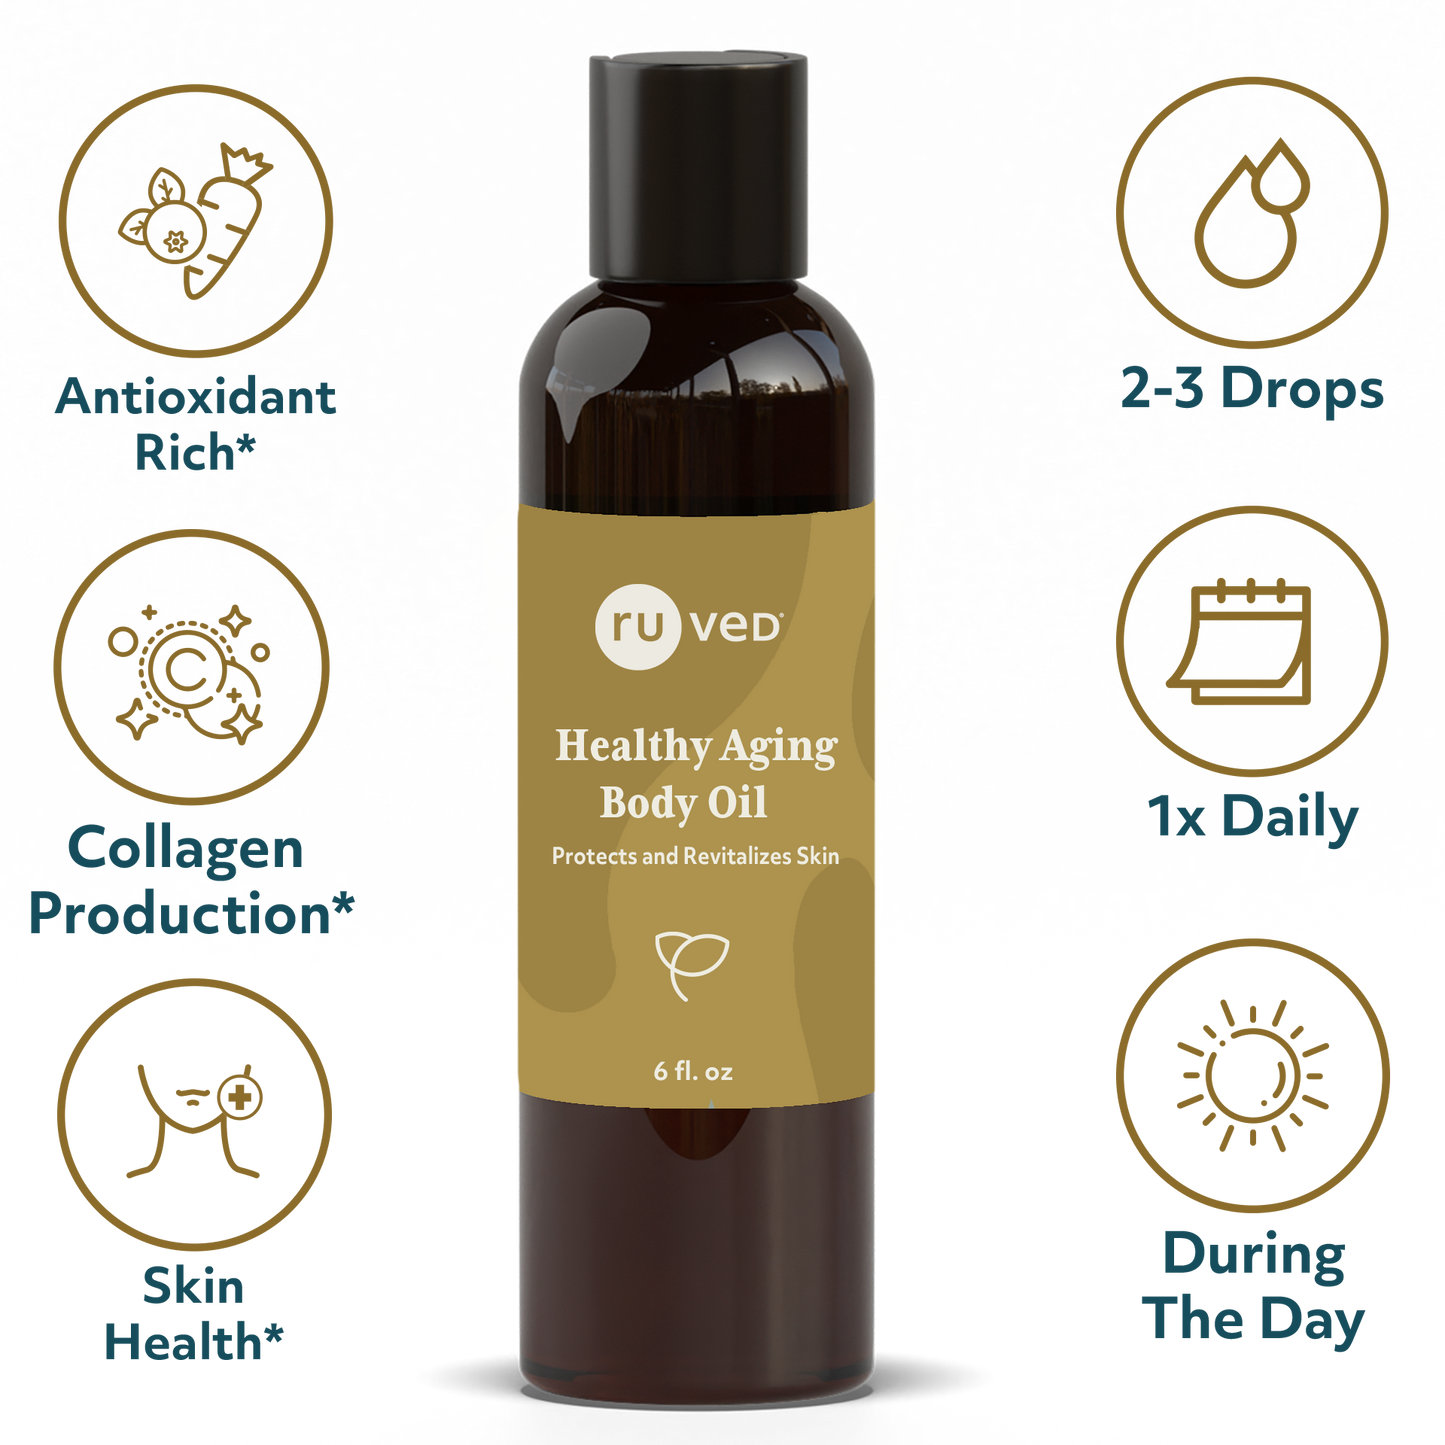 Healthy Aging Body Oil Infographics - Luxurious blend of natural oils to nourish and rejuvenate skin, promoting a radiant, youthful appearance. 100ml Bottle.